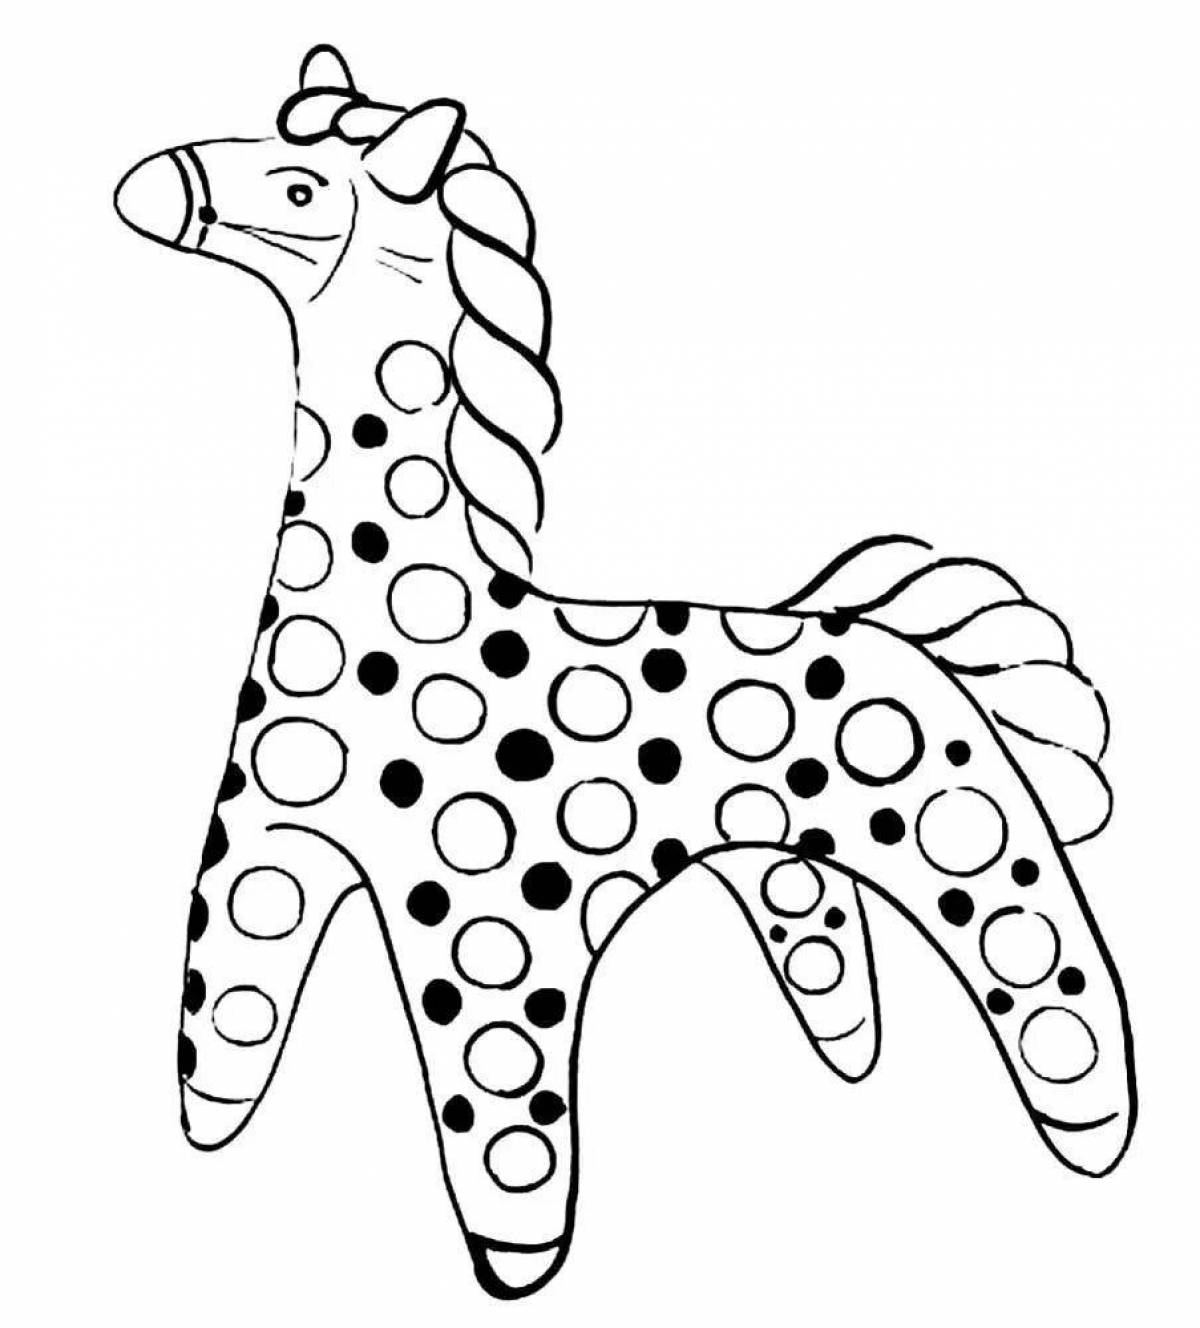 Coloring book shining horse for kids